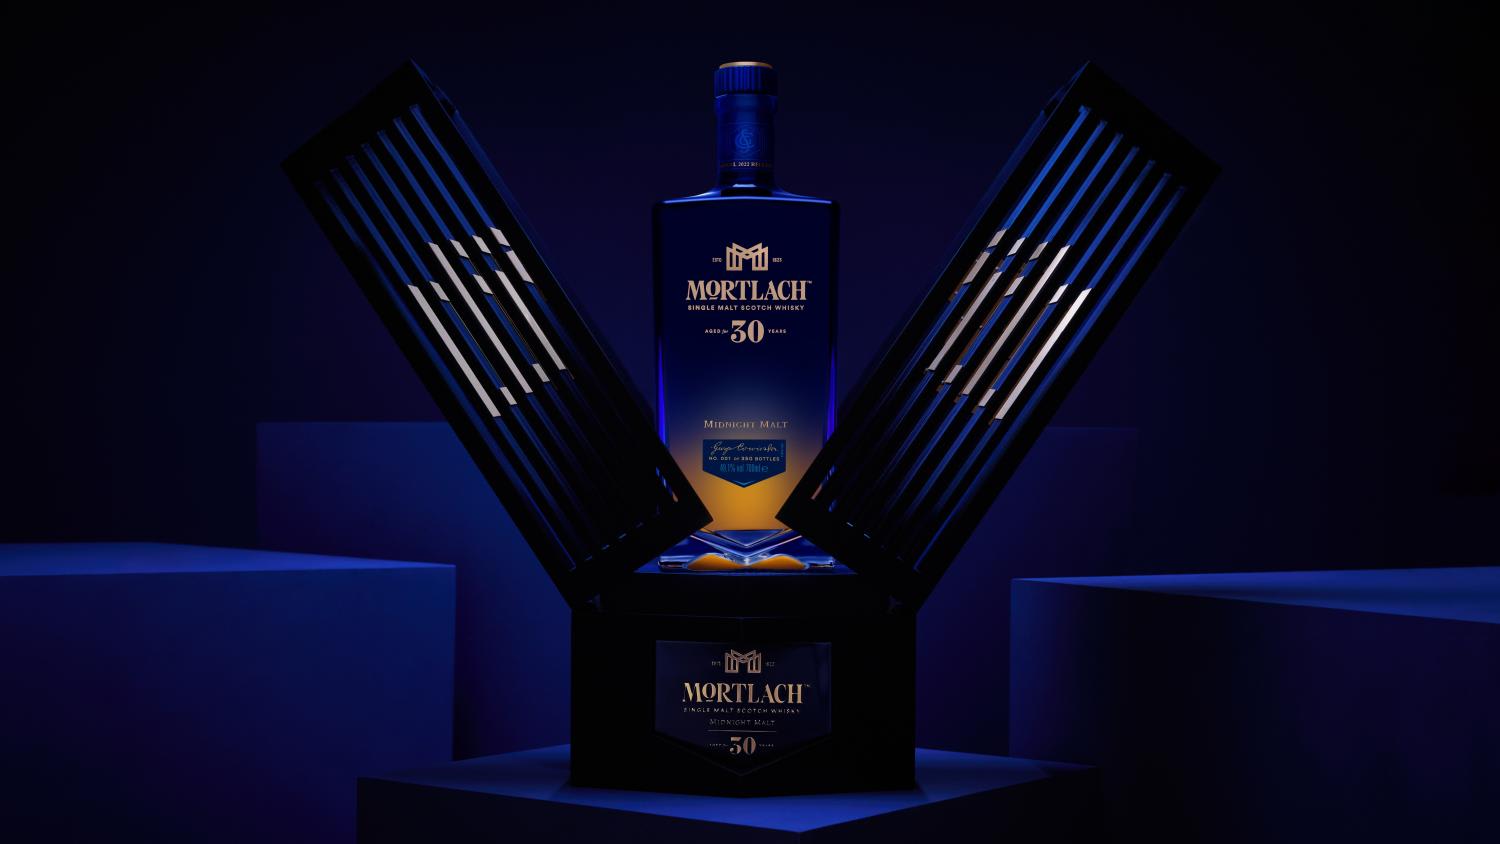 The richer the night, the deeper the mystery: Mortlach Midnight Malt 30 Year Old invites secrets to be revealed